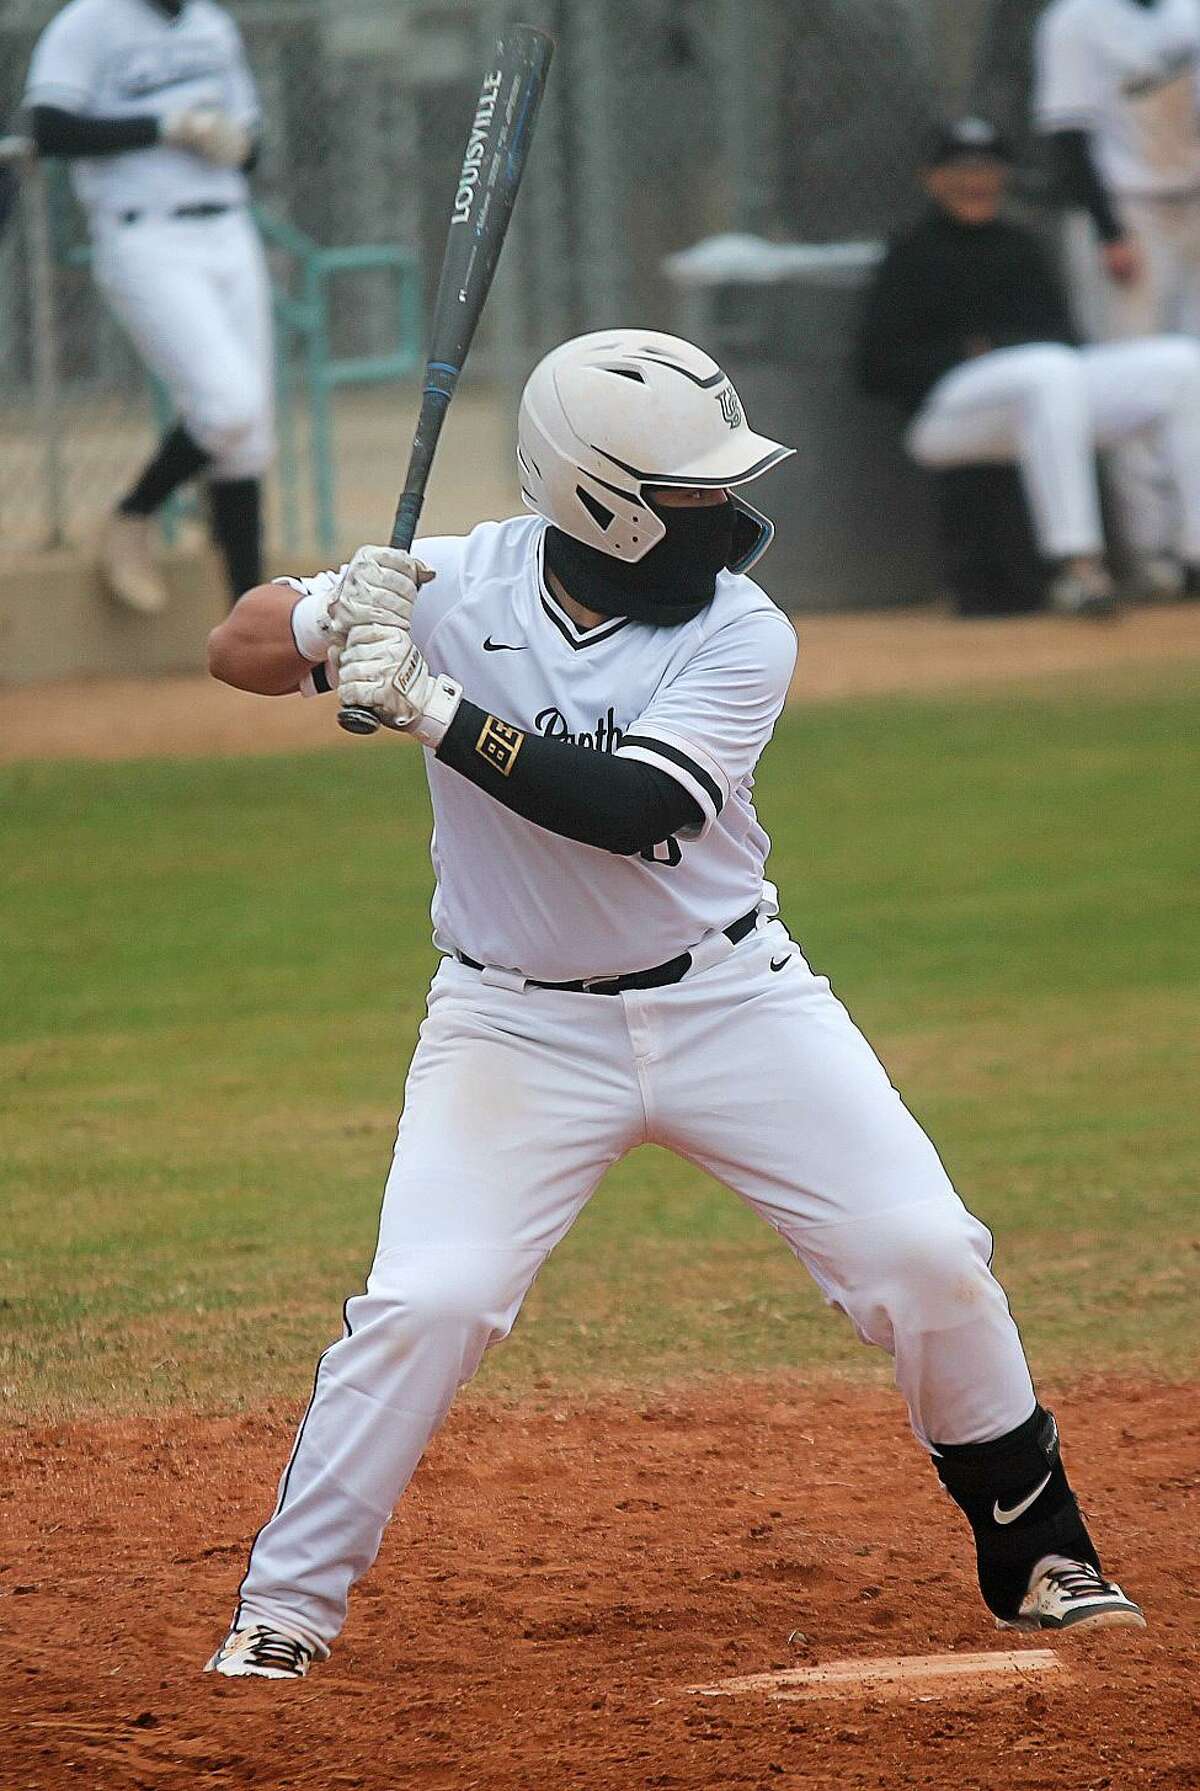 United South’s Jorge Hernandez went 0 for 1 in Tuesday’s win over Nixon, but he drew three walks and his courtesy runner scored the game-winning run in the ninth inning.